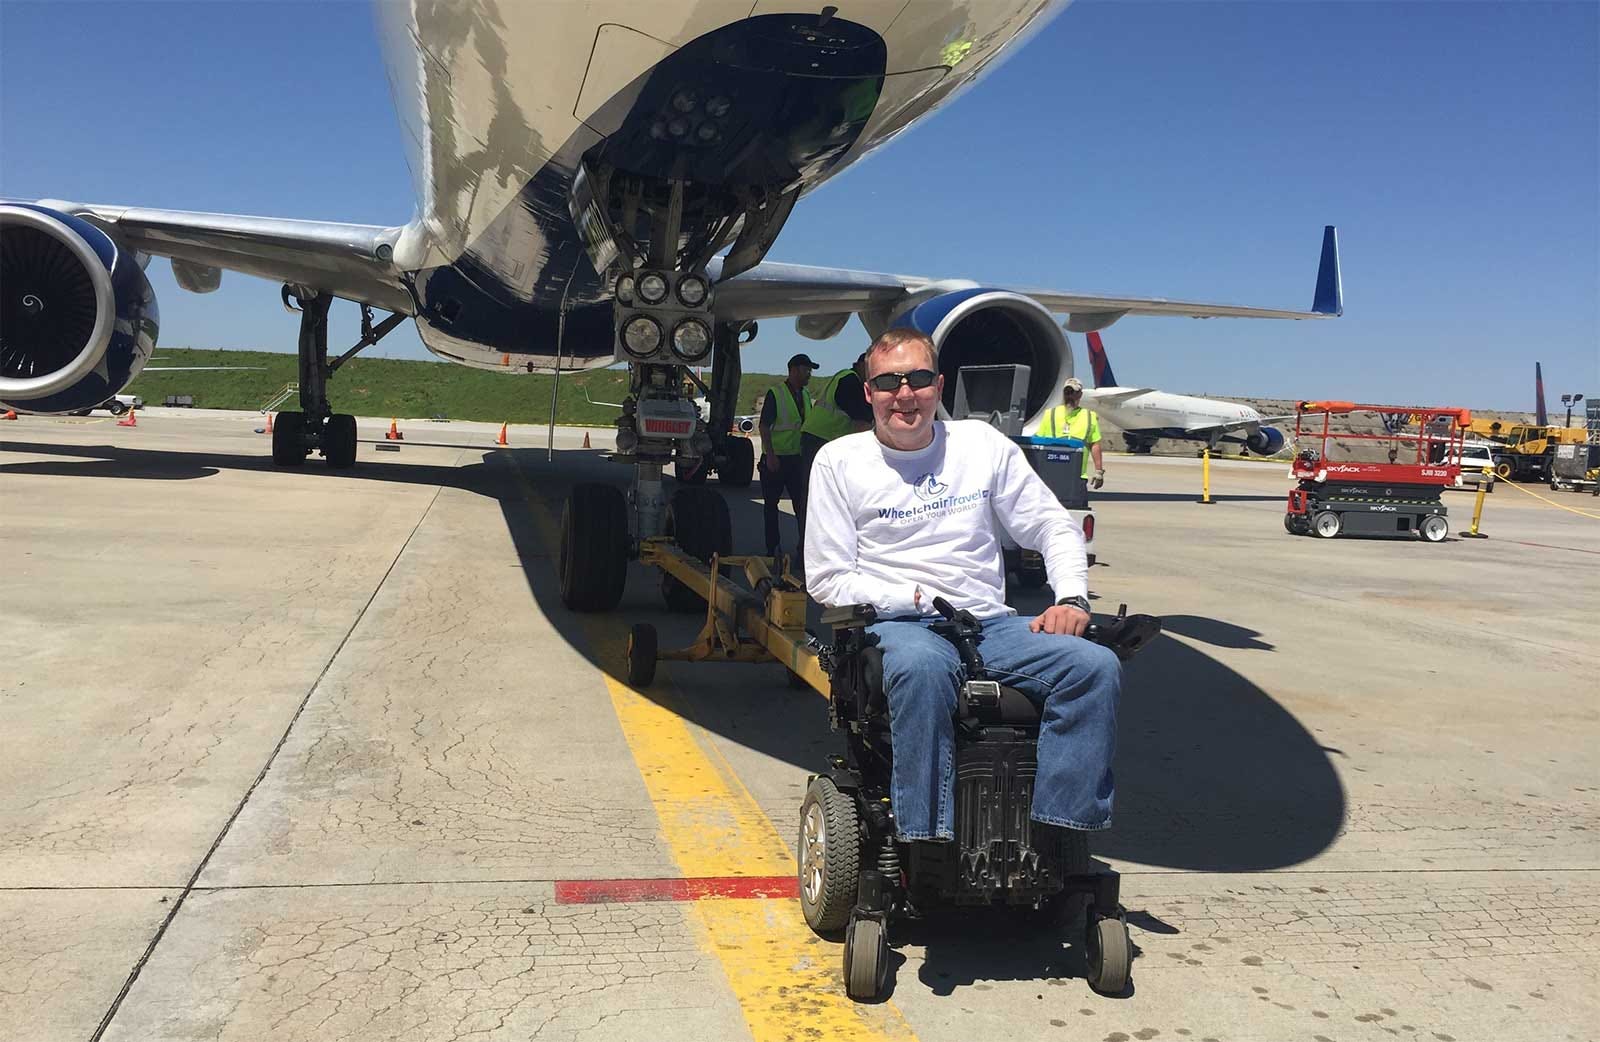 John seated in his wheelchair next to the front wheel of a Delta Air Lines Boeing 757 aircraft.